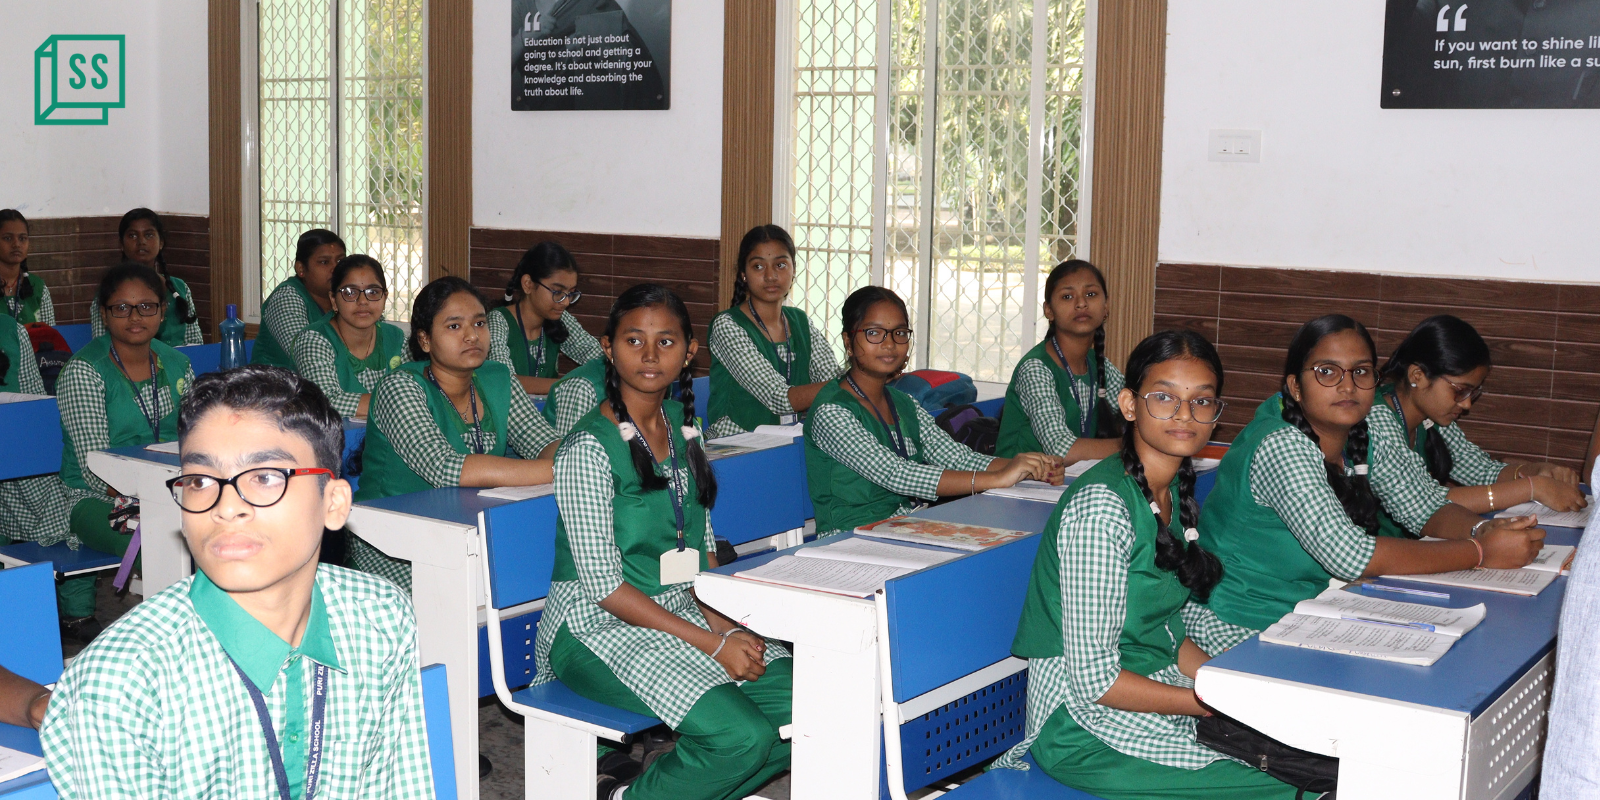 Odisha’s 5T High School Transformation Programme is changing the face of government schools 

